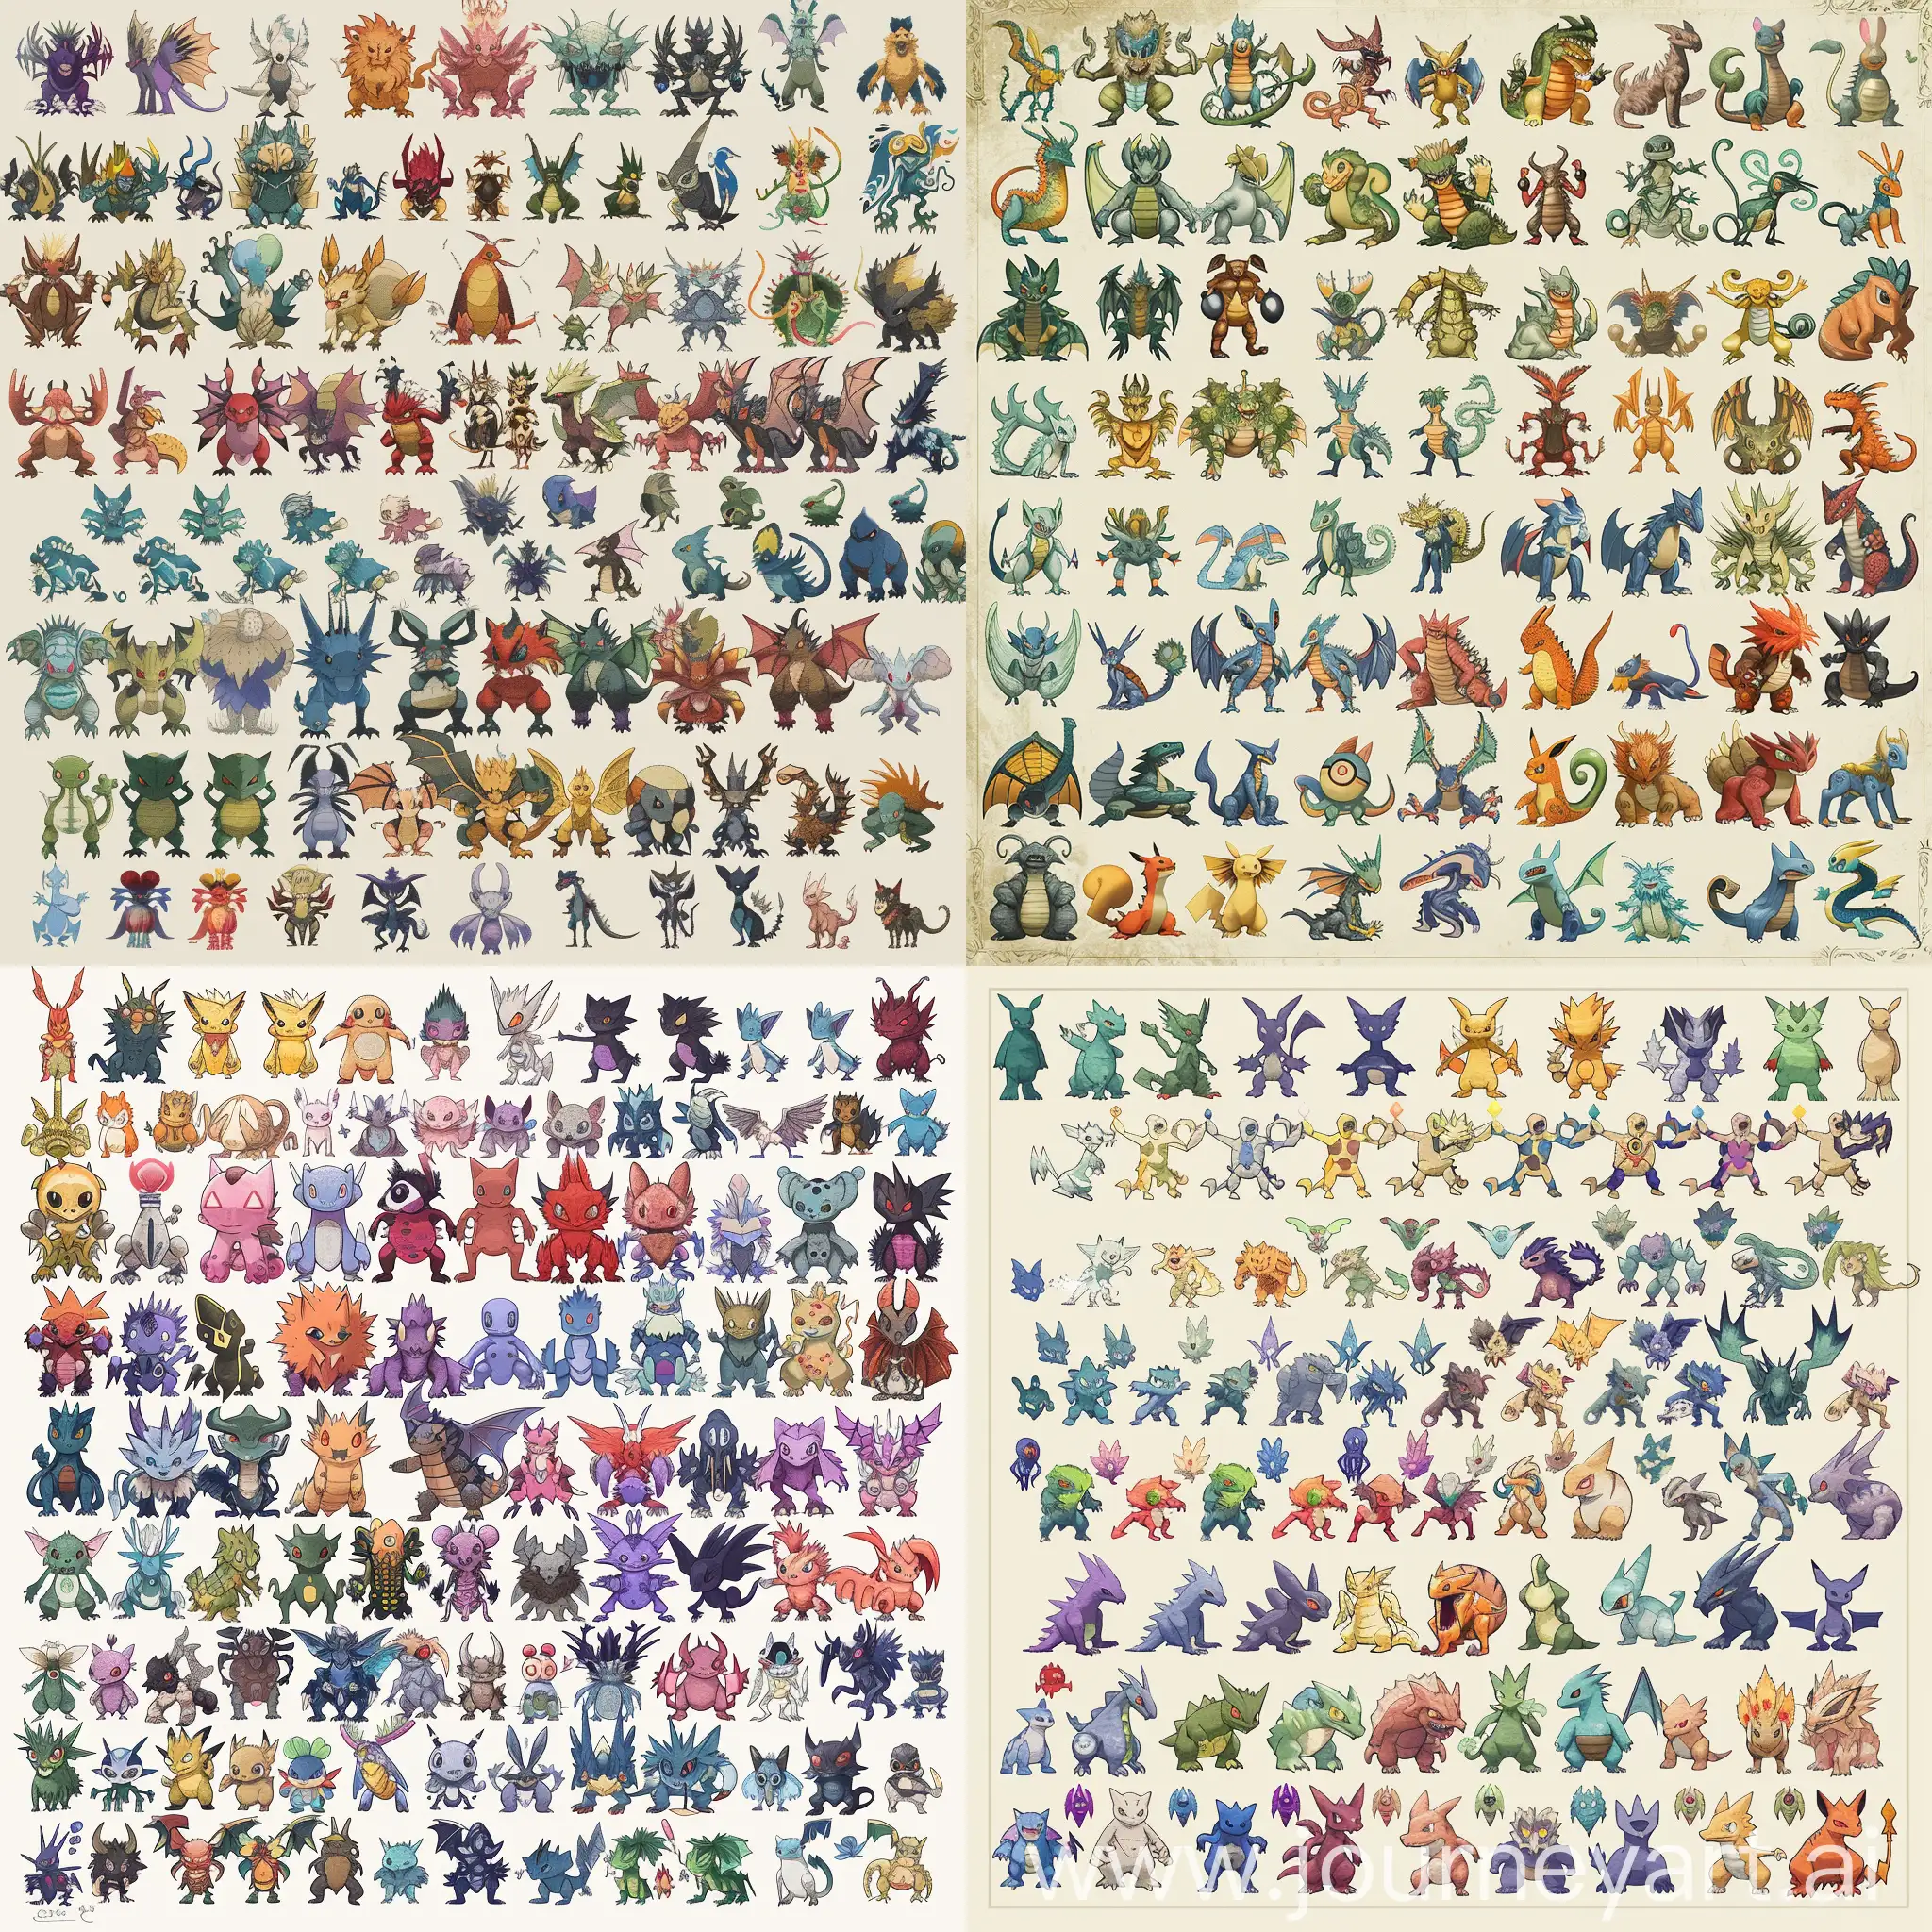 Create a picture with one hundred creatures of different types similar to Pokemon.